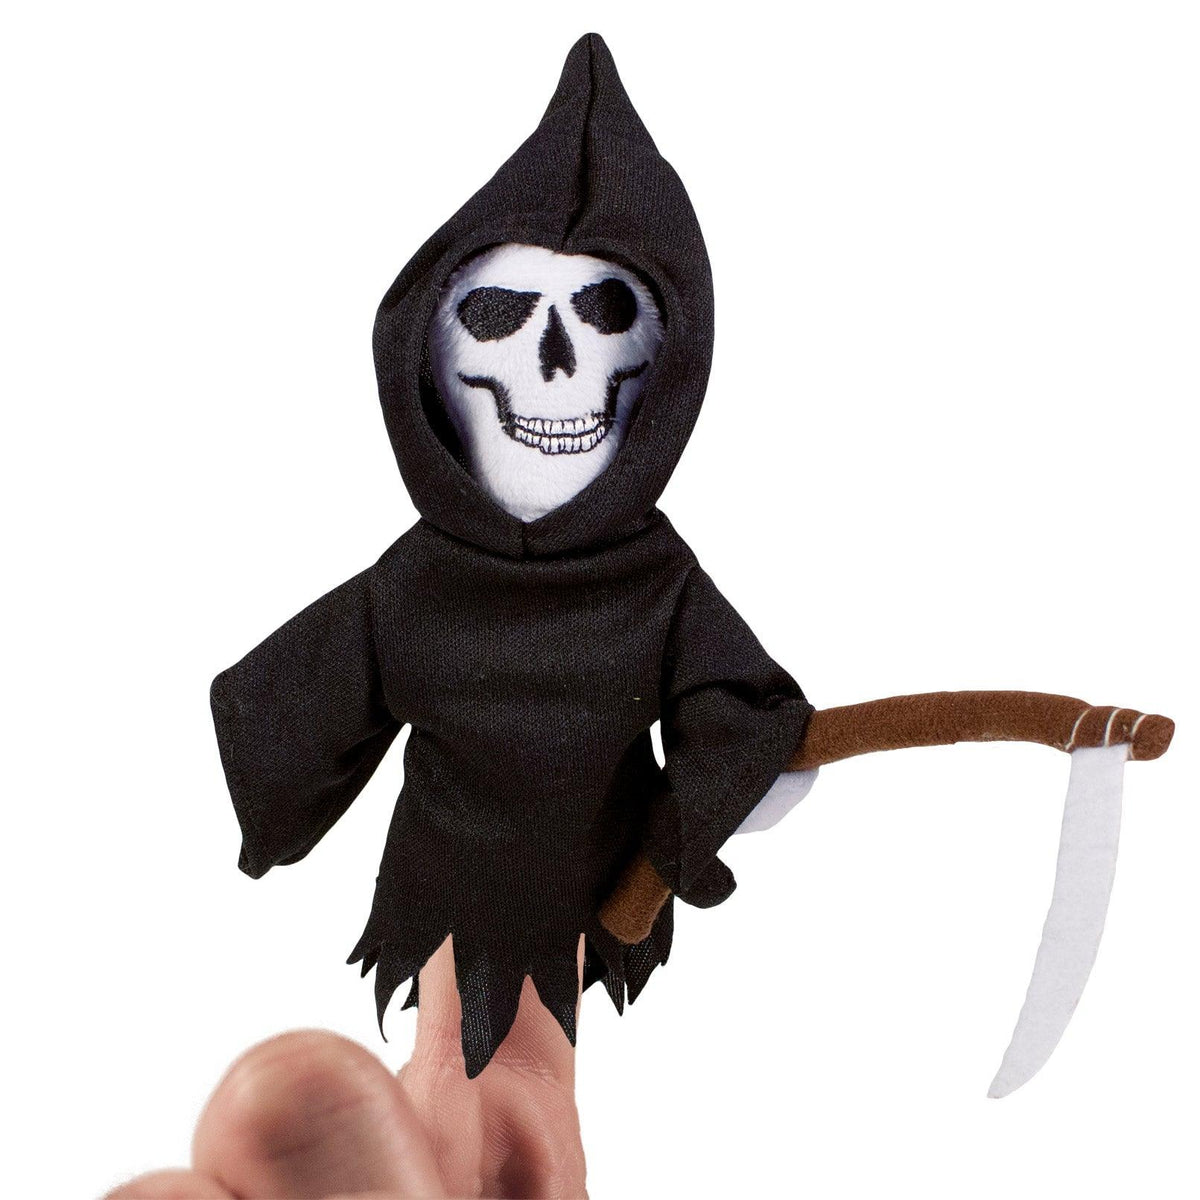 Front view of the Grim Reaper finger puppet on a finger, against a white background.